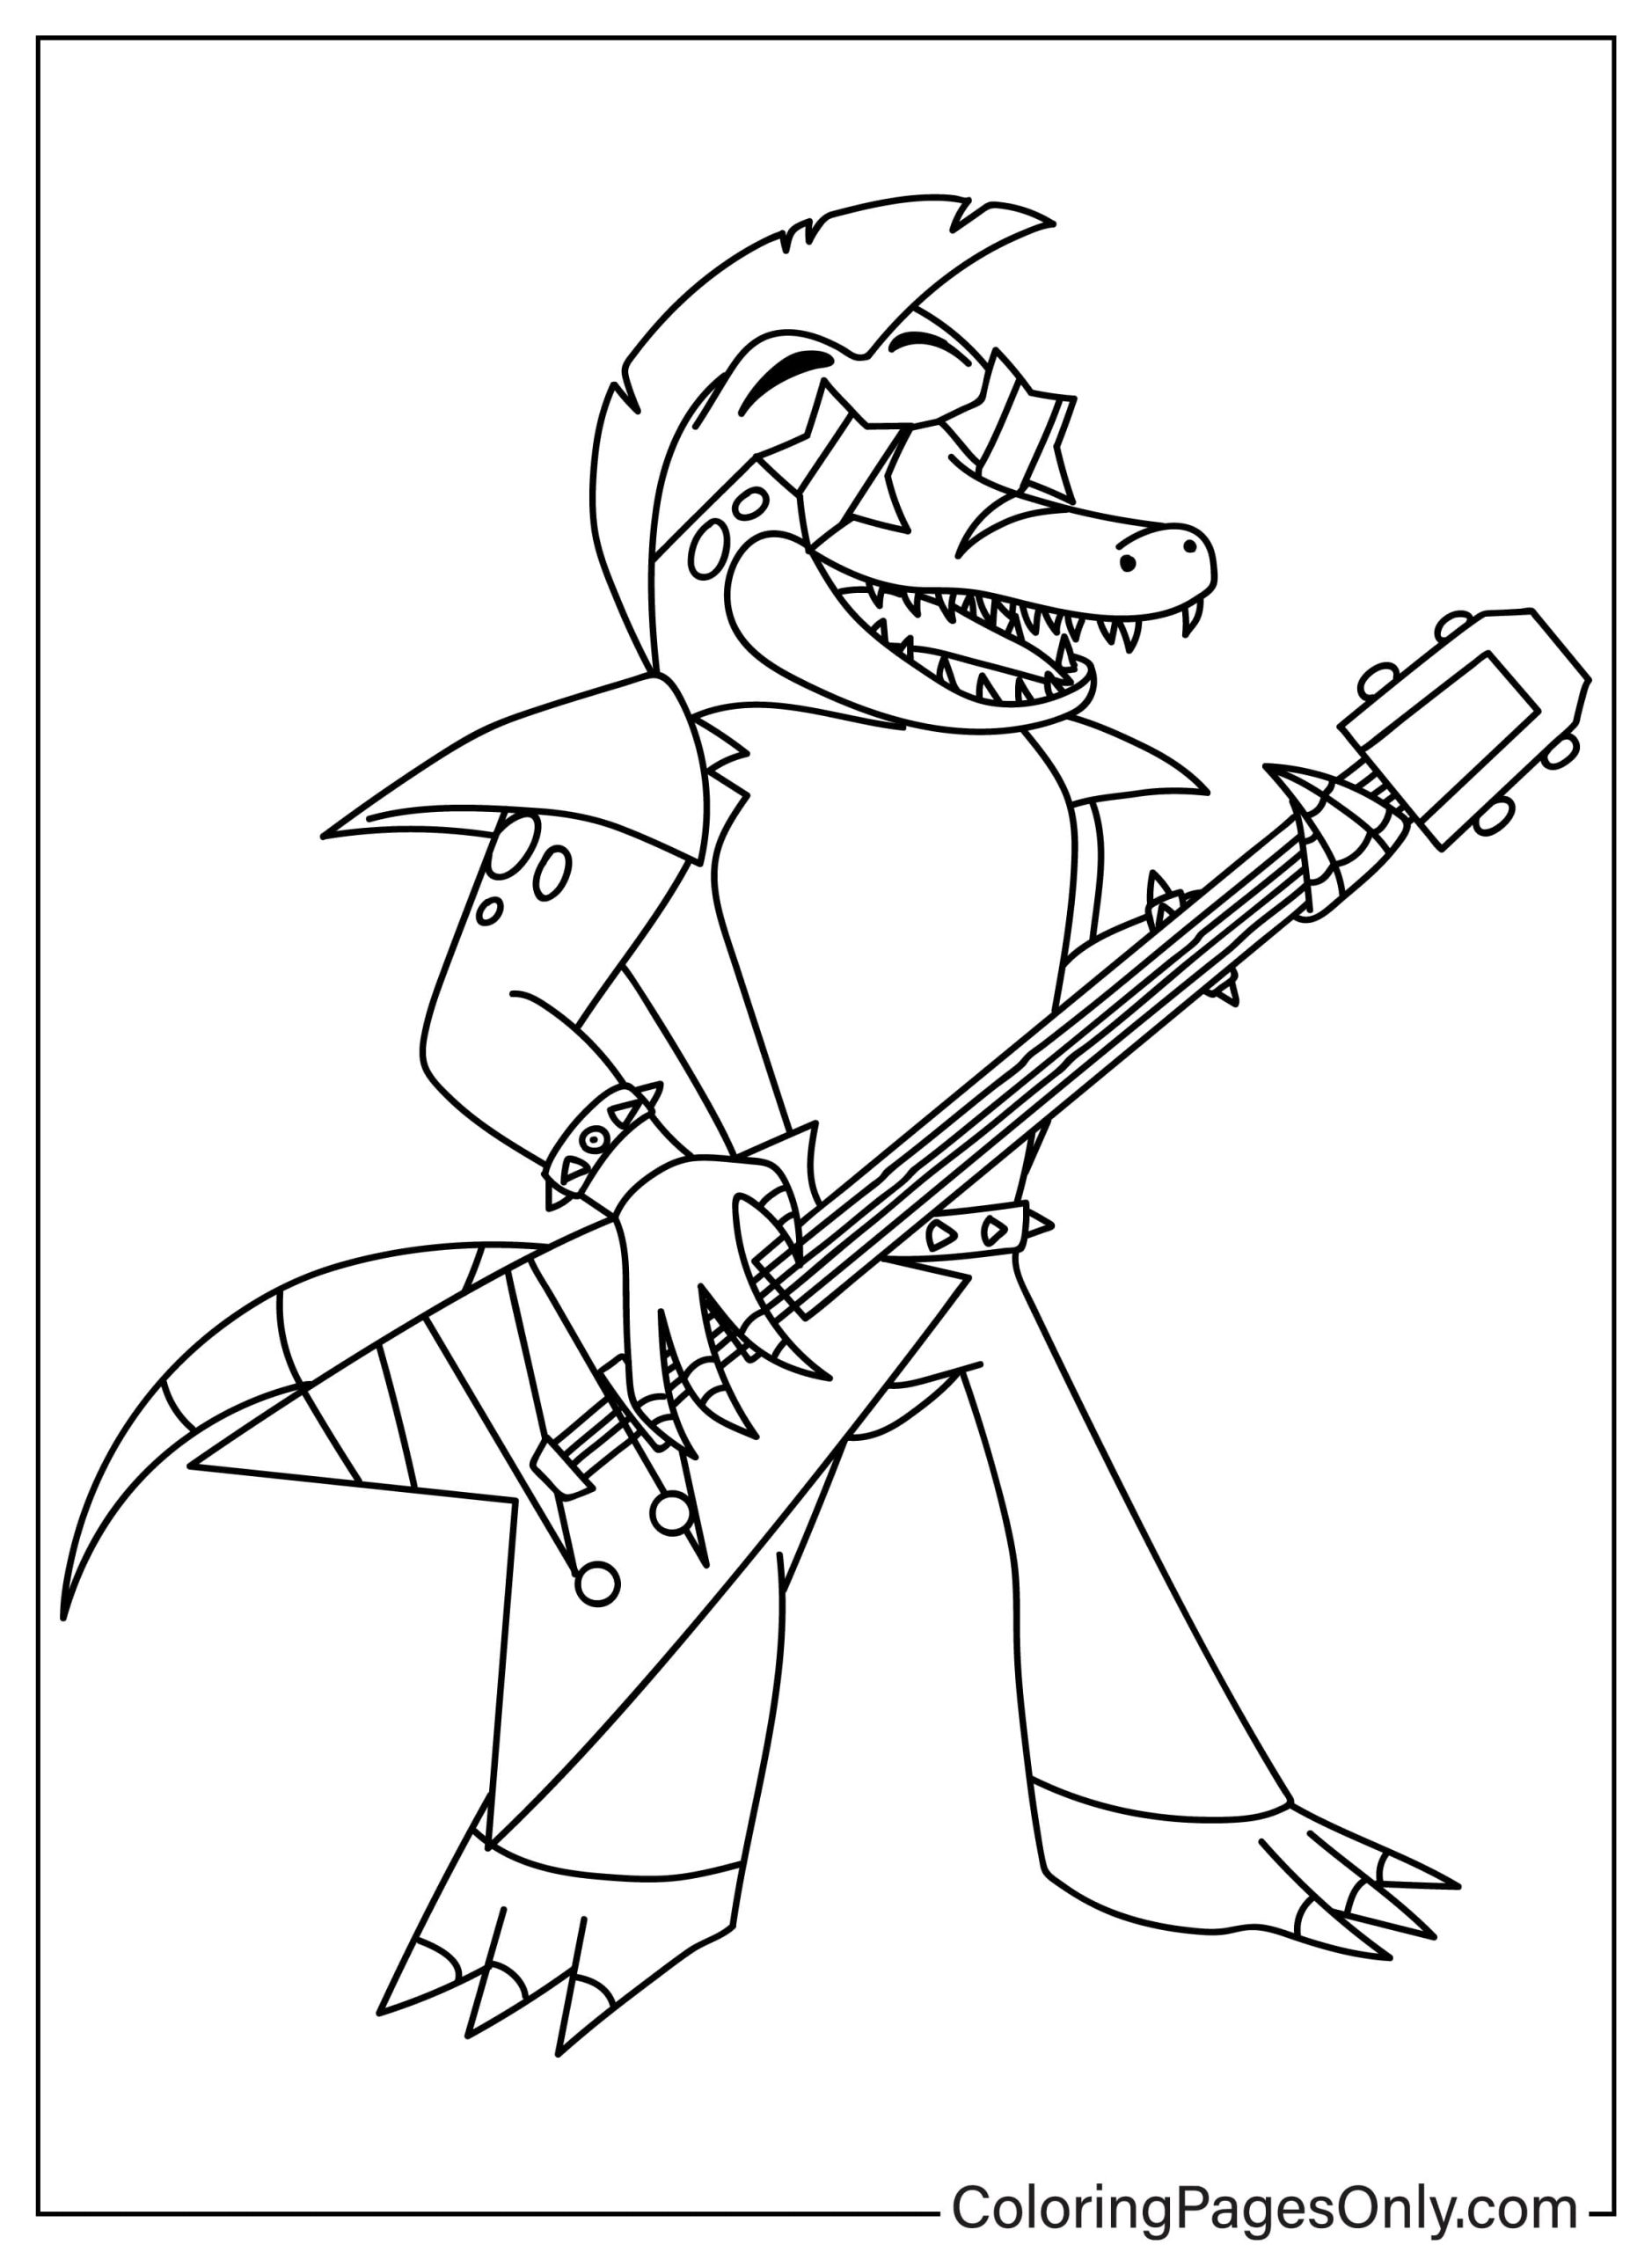 Montgomery Gator Coloring Page to Print ...